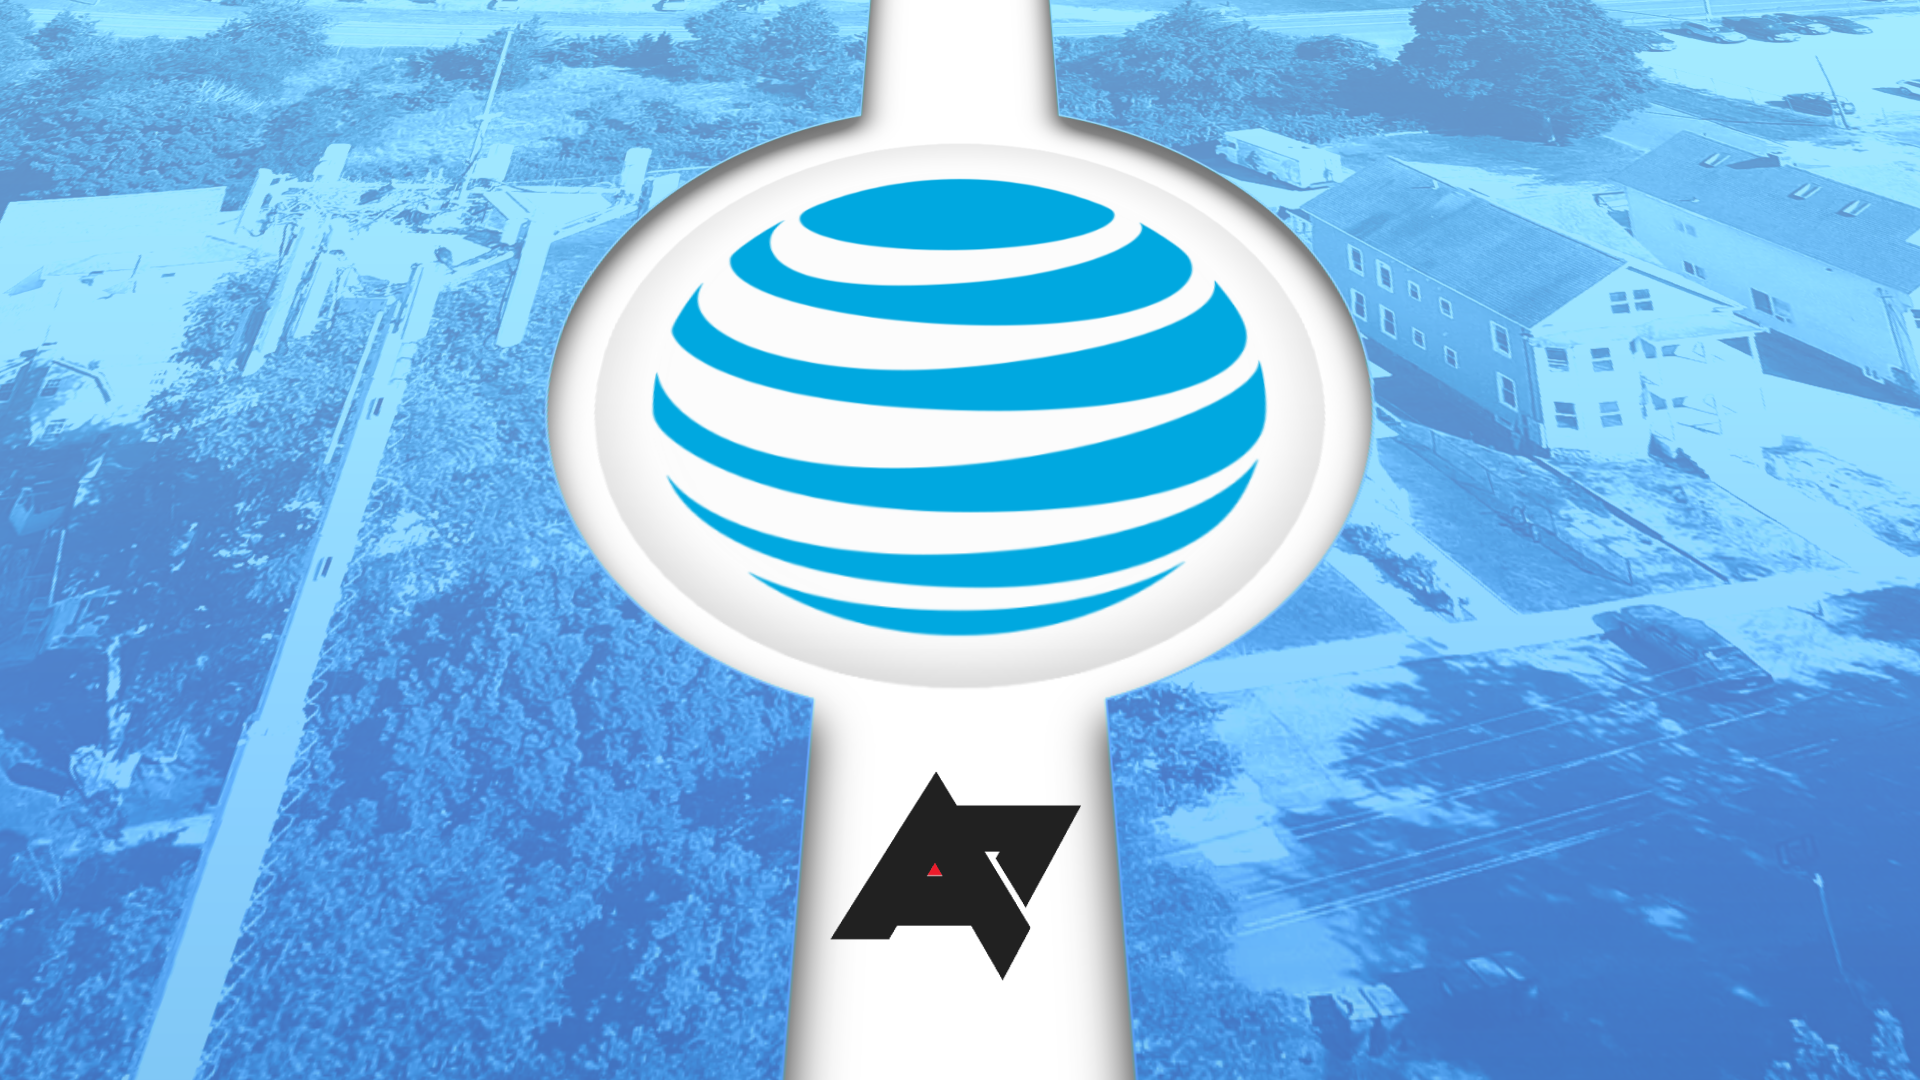 The AT&T logo with an image of a cell tower in the background